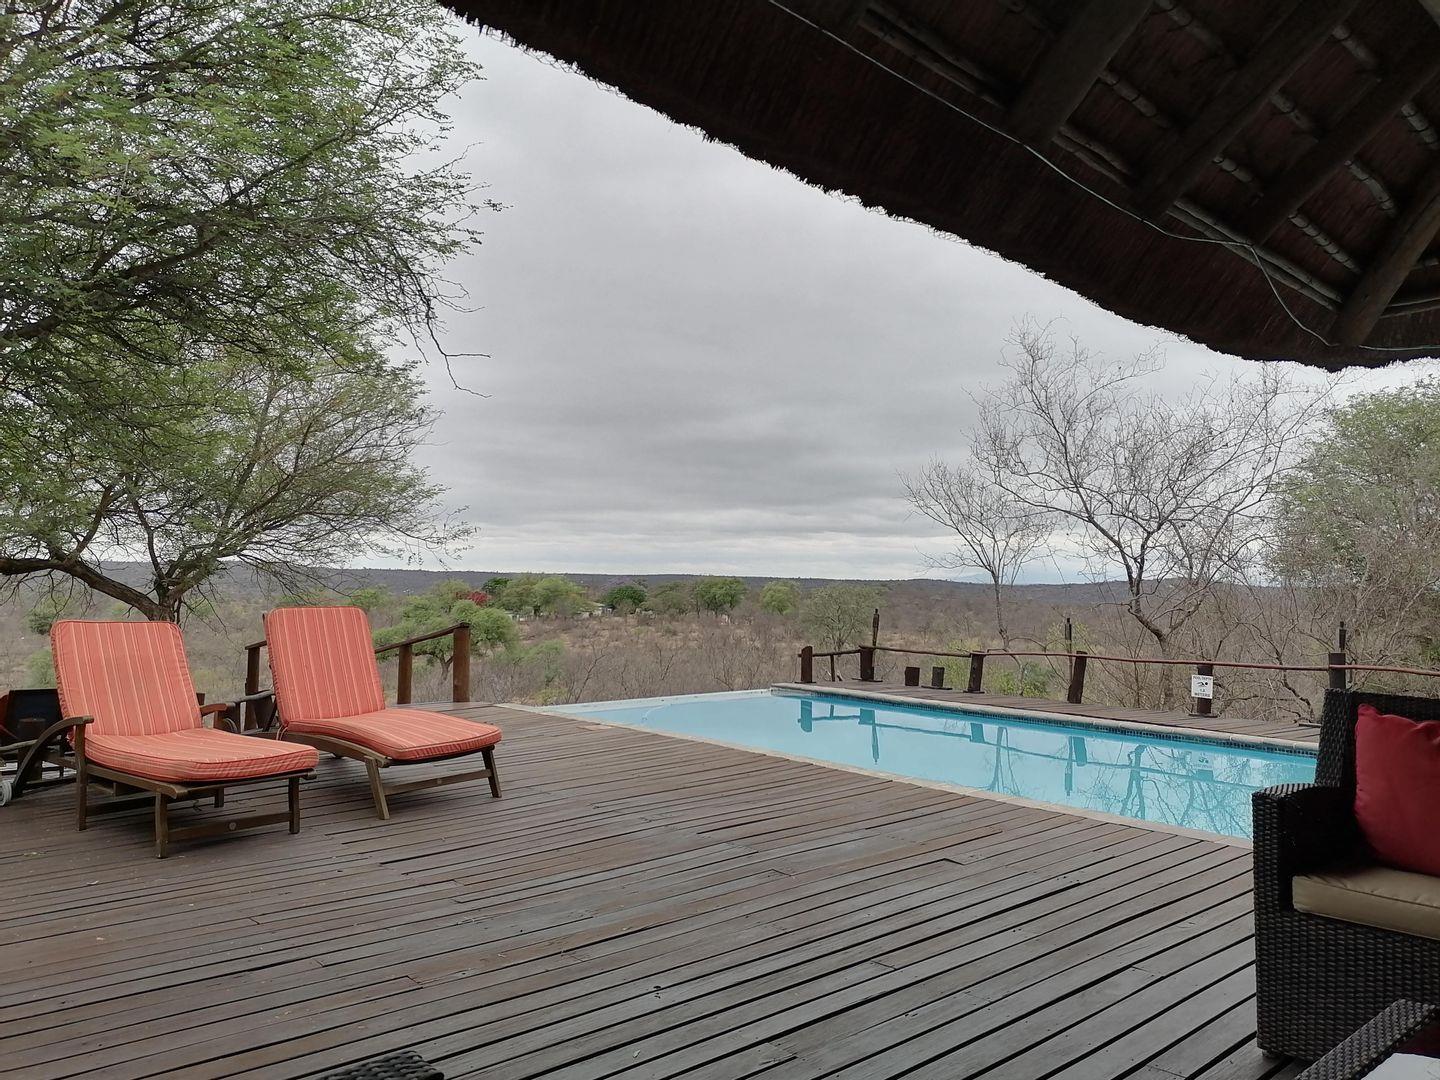  Bedroom Property for Sale in Grietjie Private Nature Reserve Limpopo